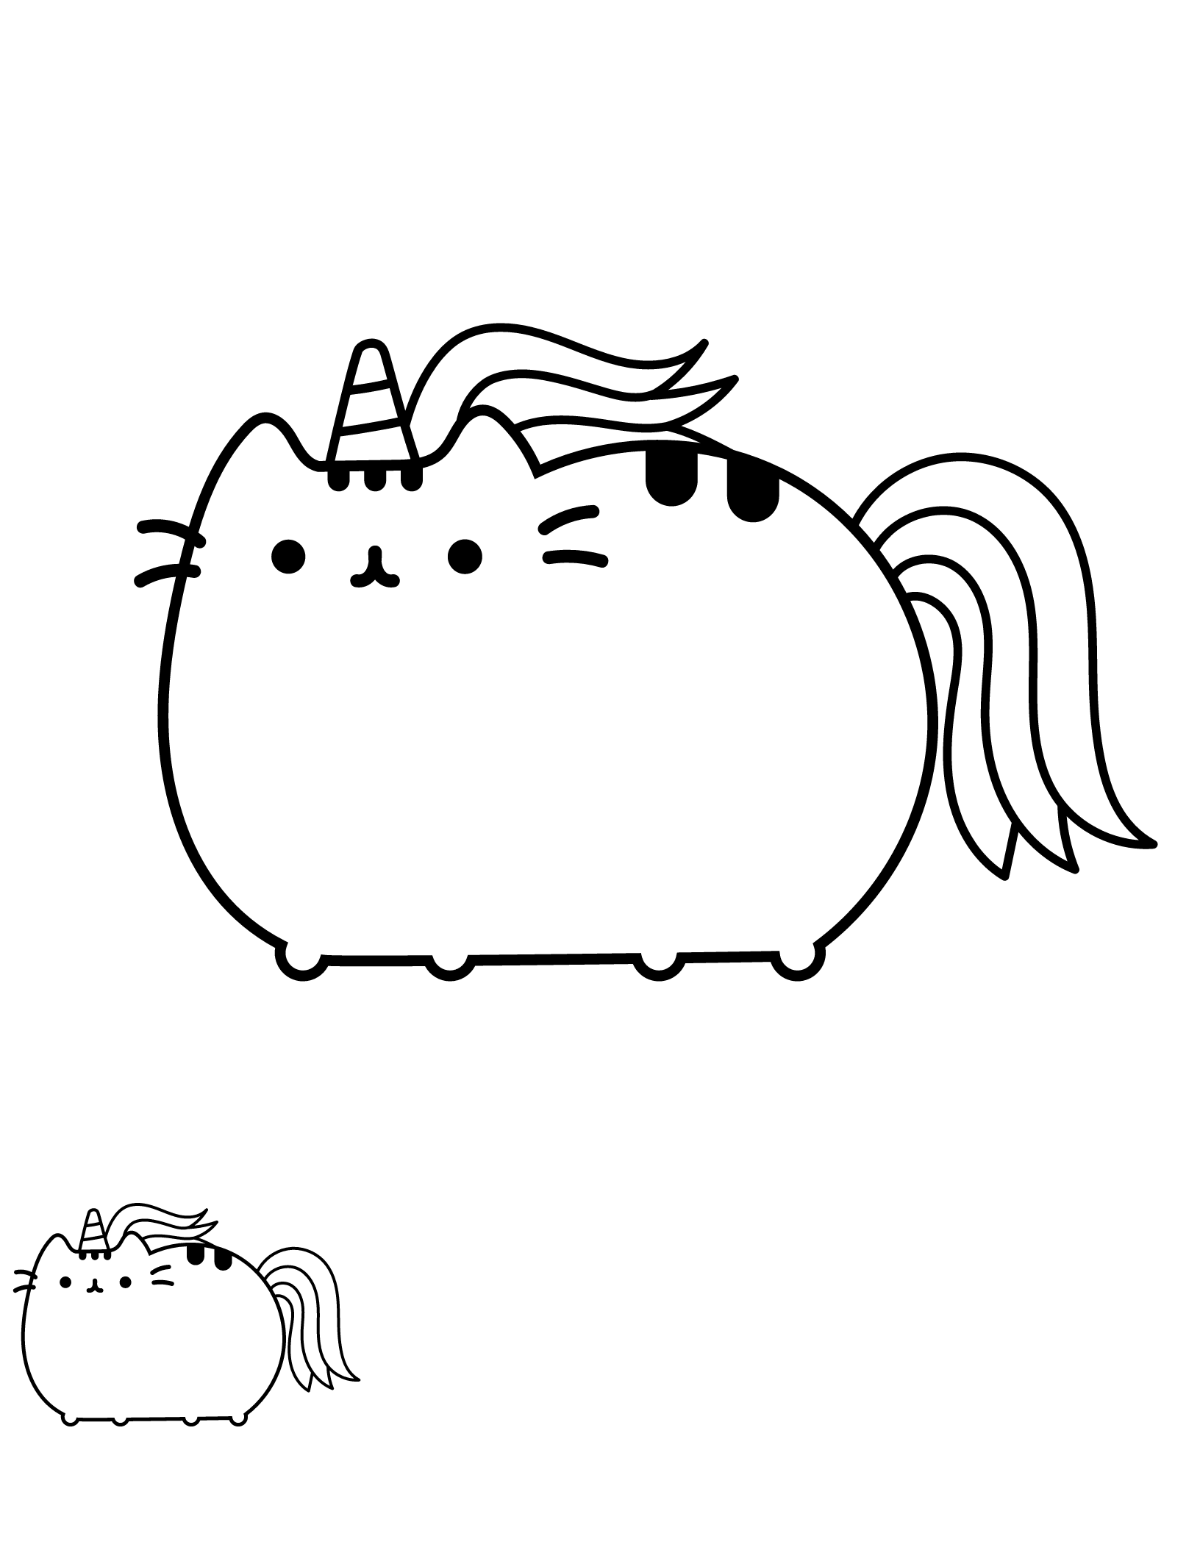 Pusheen Unicorn Coloring Page Template